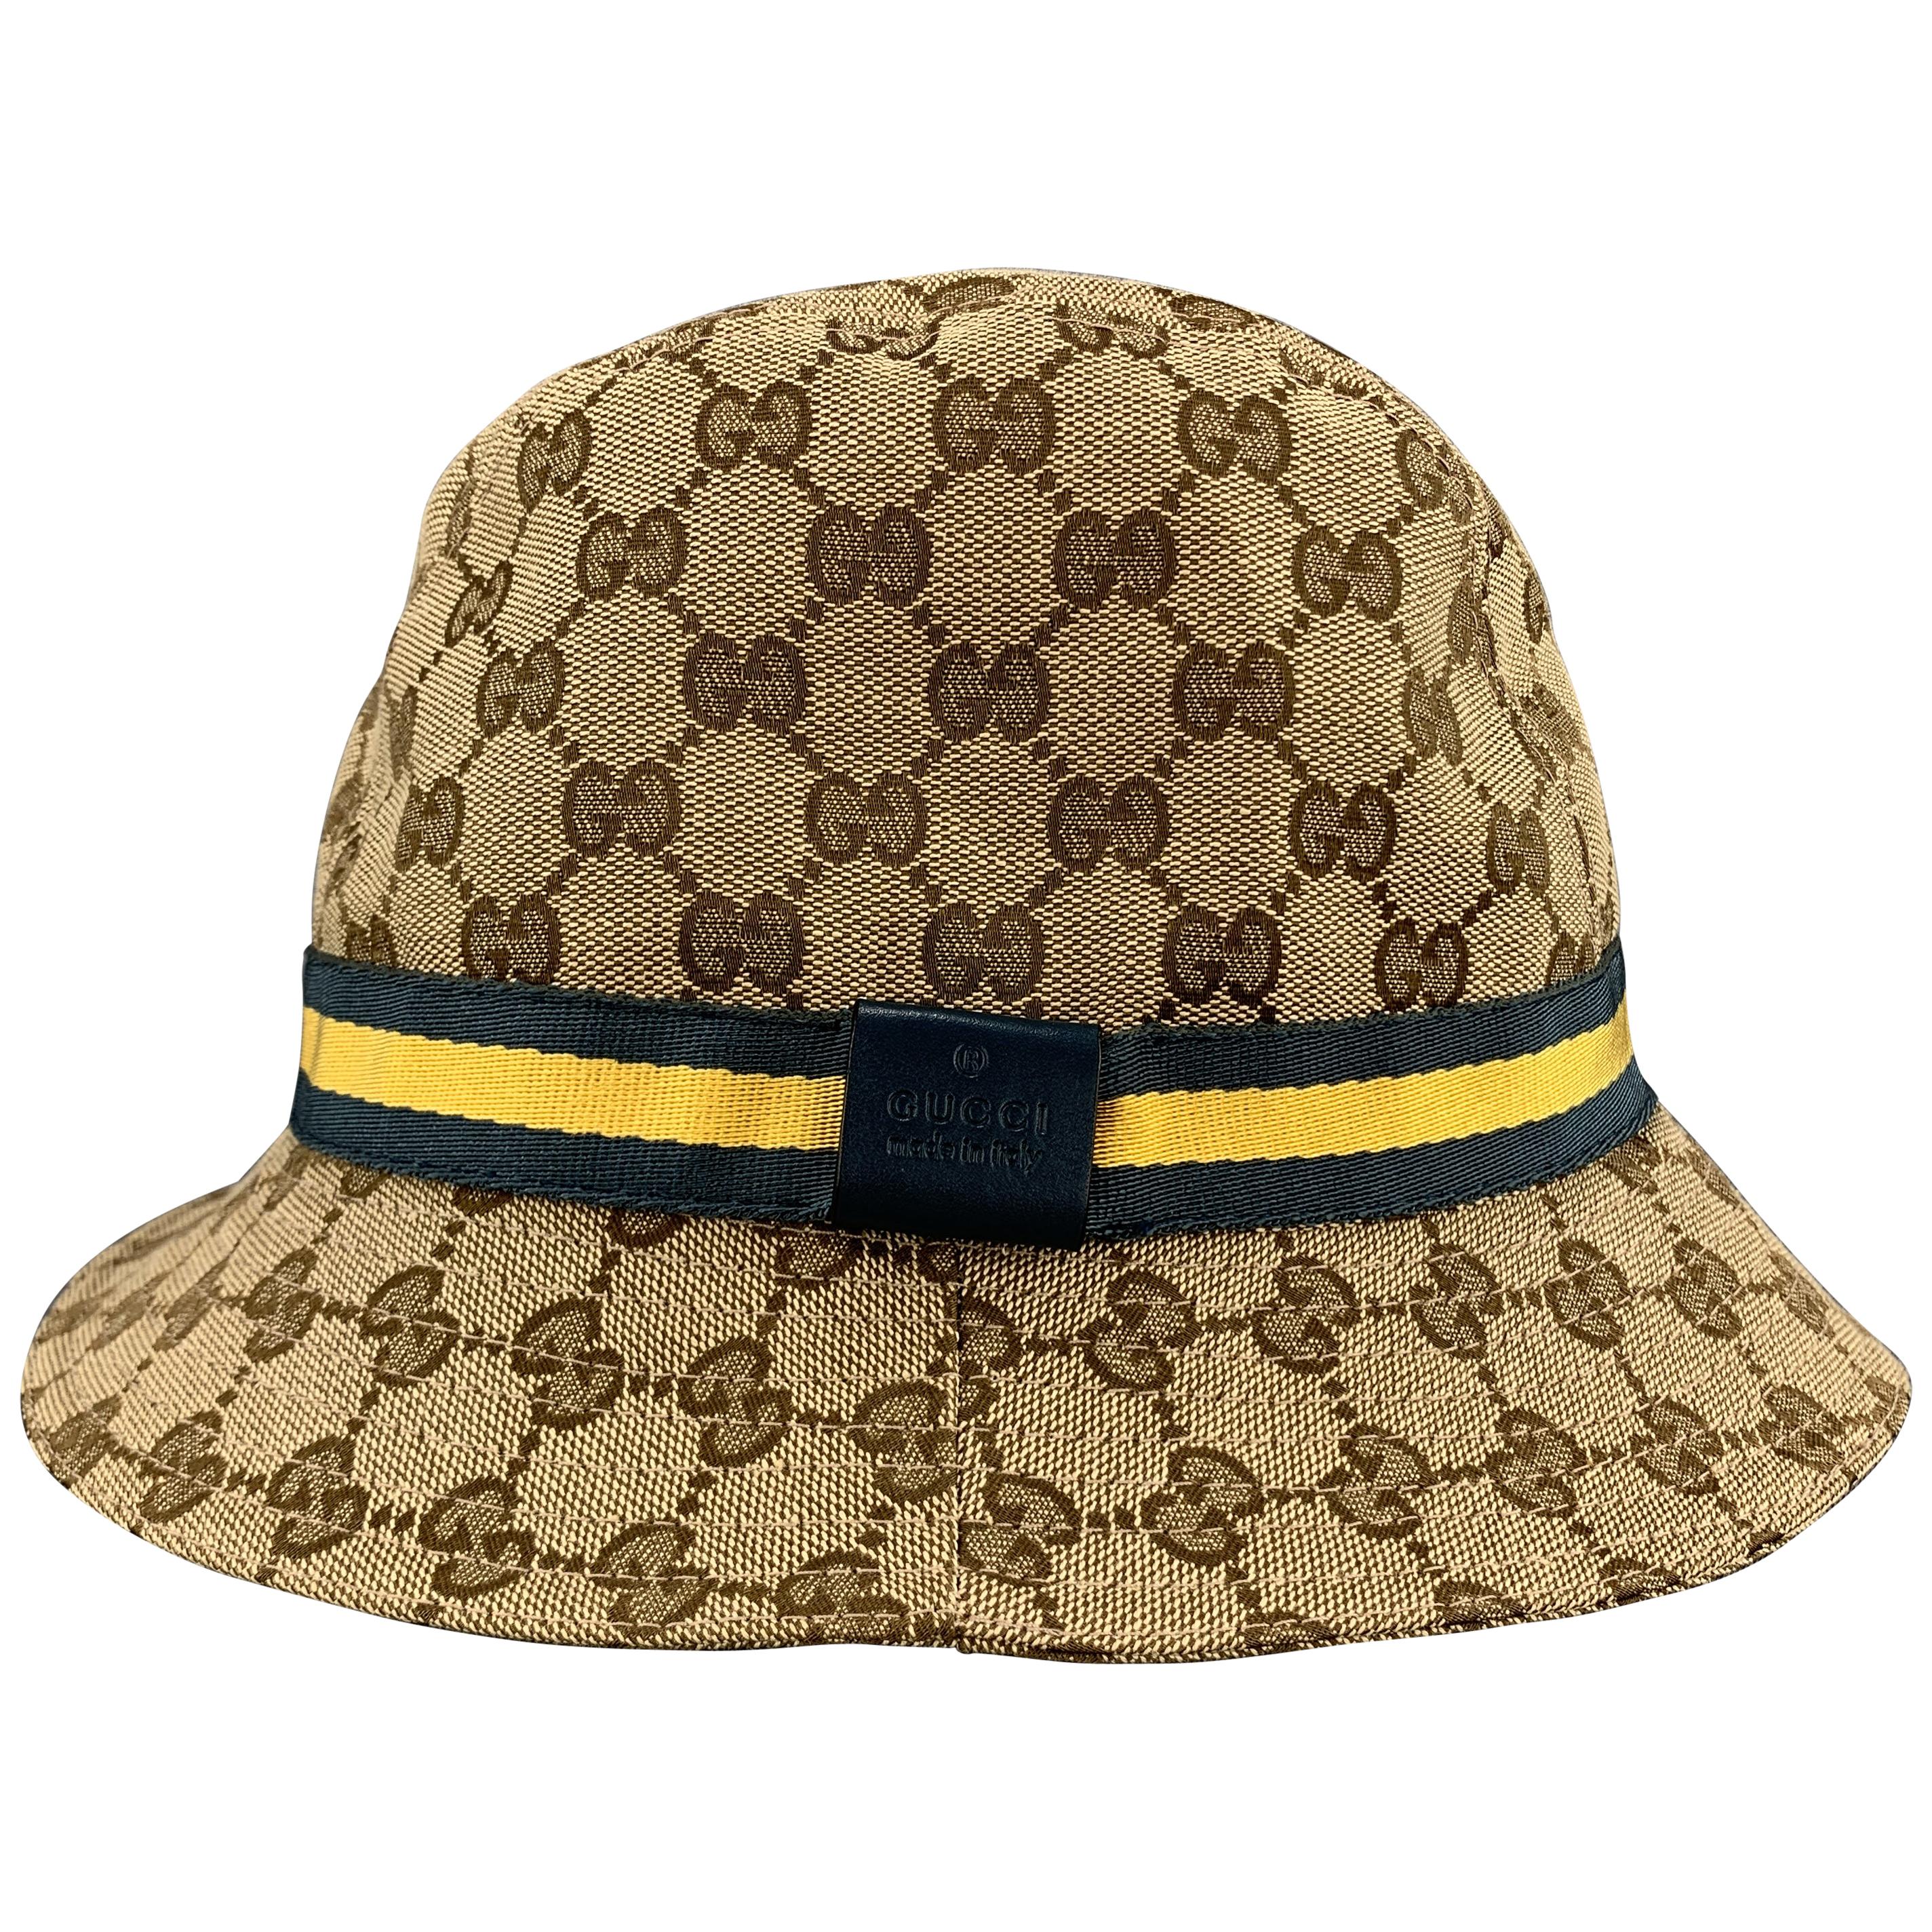 Gucci Bucket Hat - 6 For Sale on 1stDibs